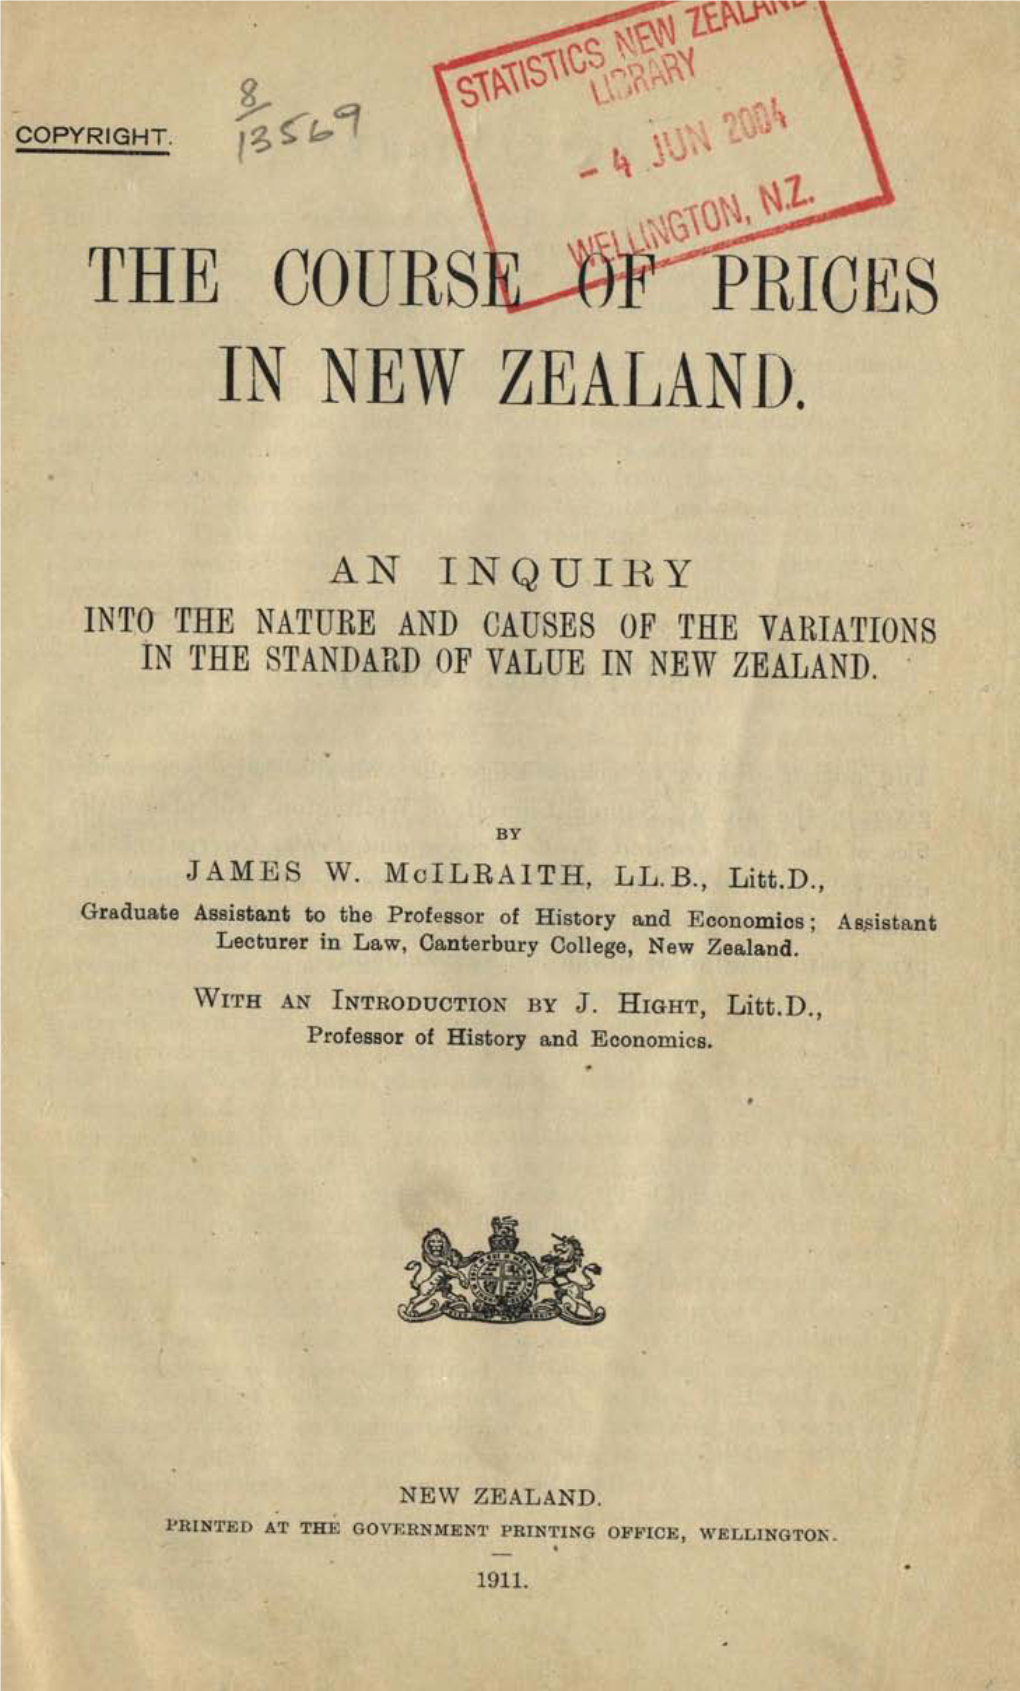 The Course of Prices in New Zealand